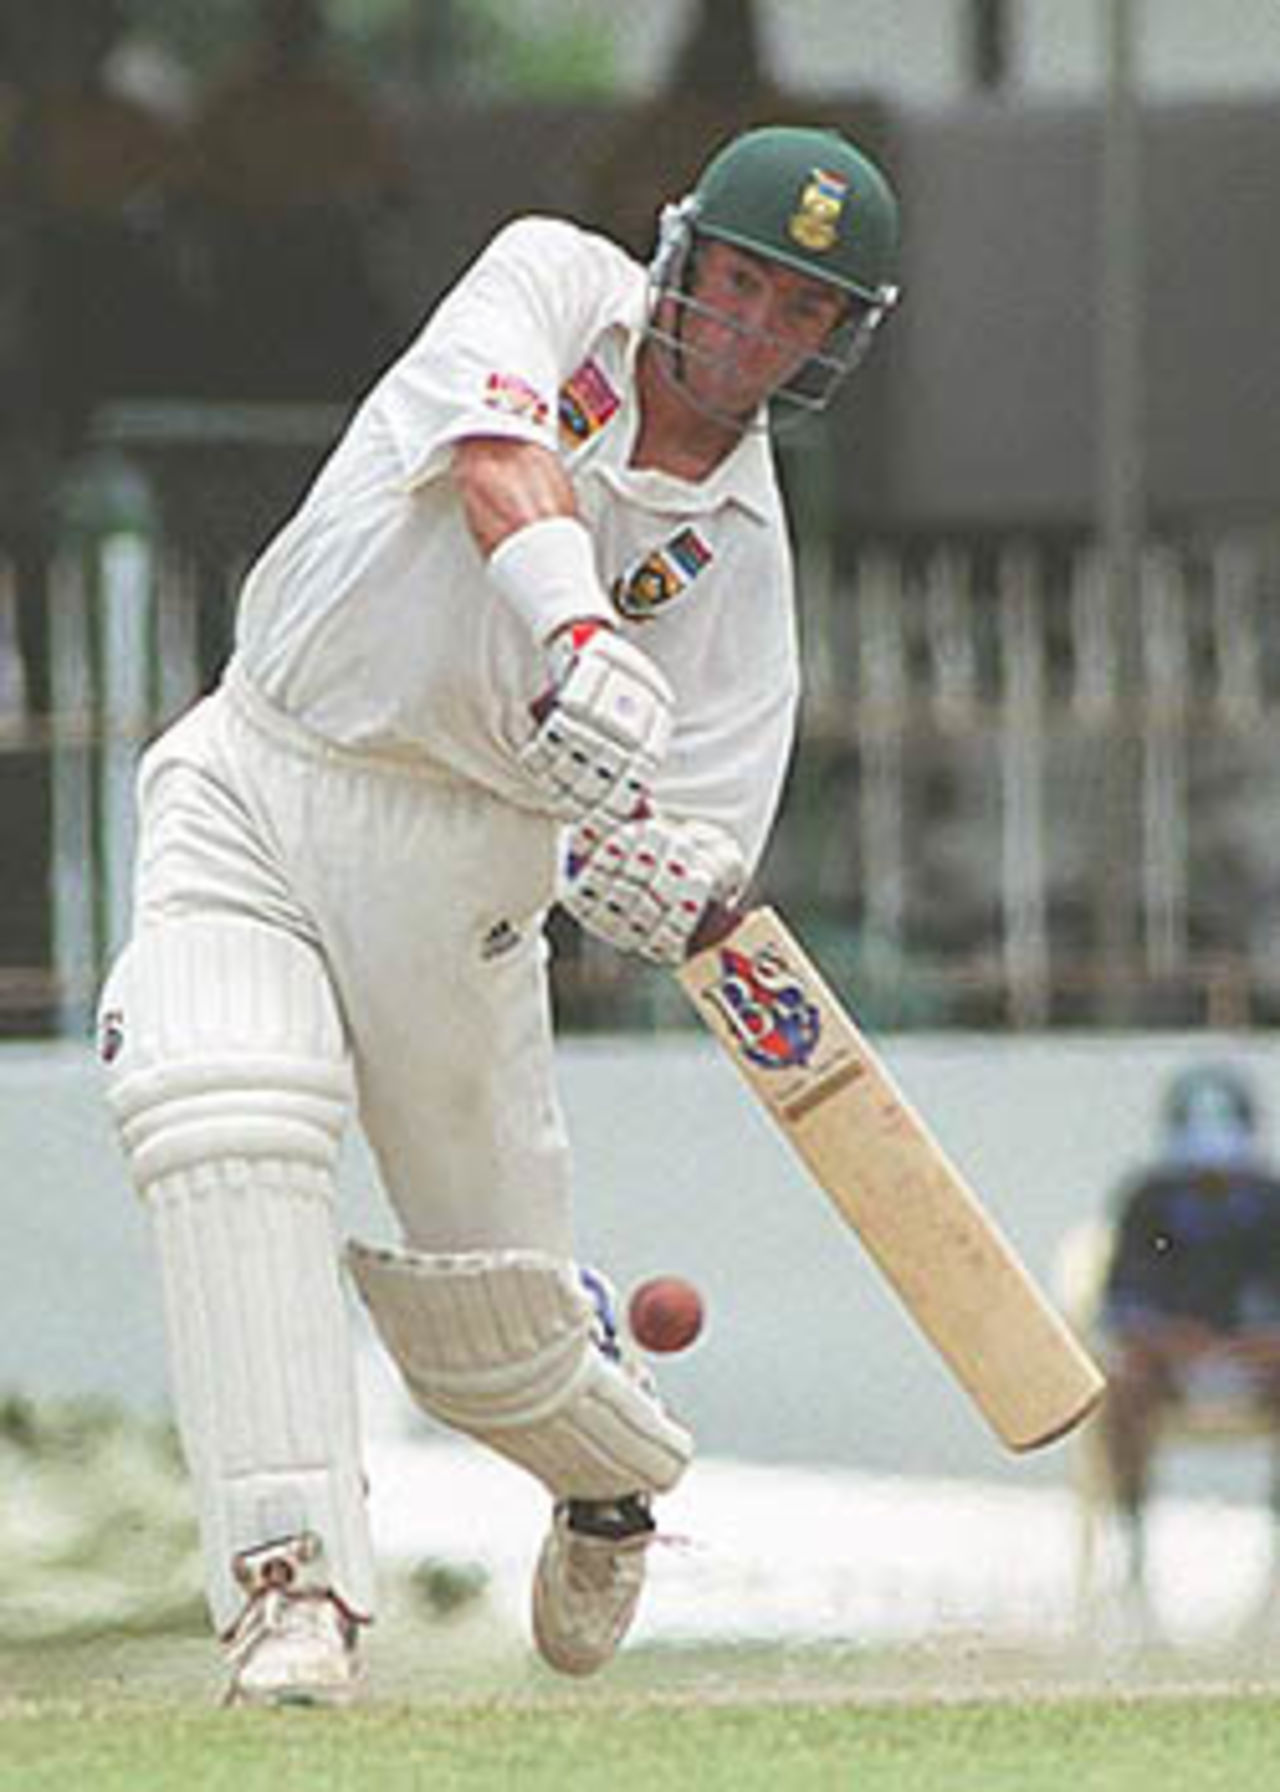 Nicky Boje smashes the ball straight back at the bowler. South Africa in Sri Lanka 2000/01, 3rd Test, Sri Lanka v South Africa, Sinhalese Sports Club Ground, Colombo, 06-10 August 2000 (Day 5).